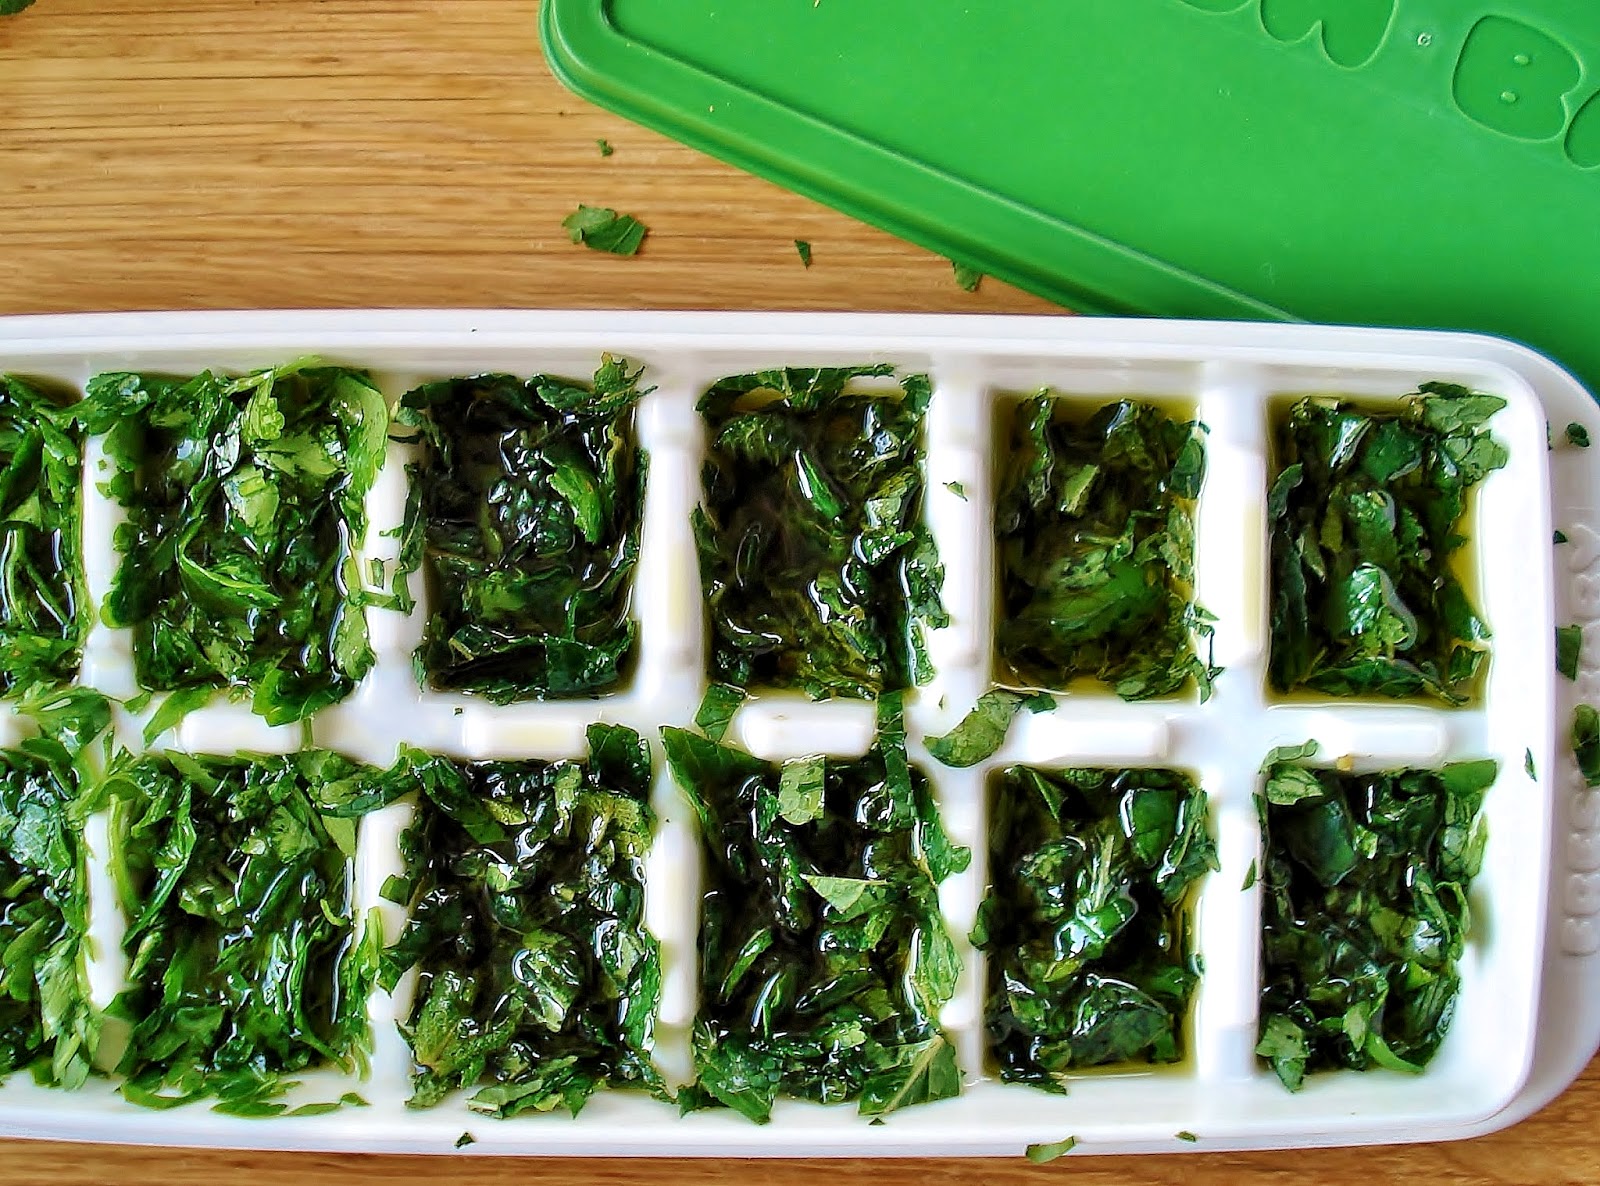 Herbs in extra virgin olive oil packed into ice cube tray